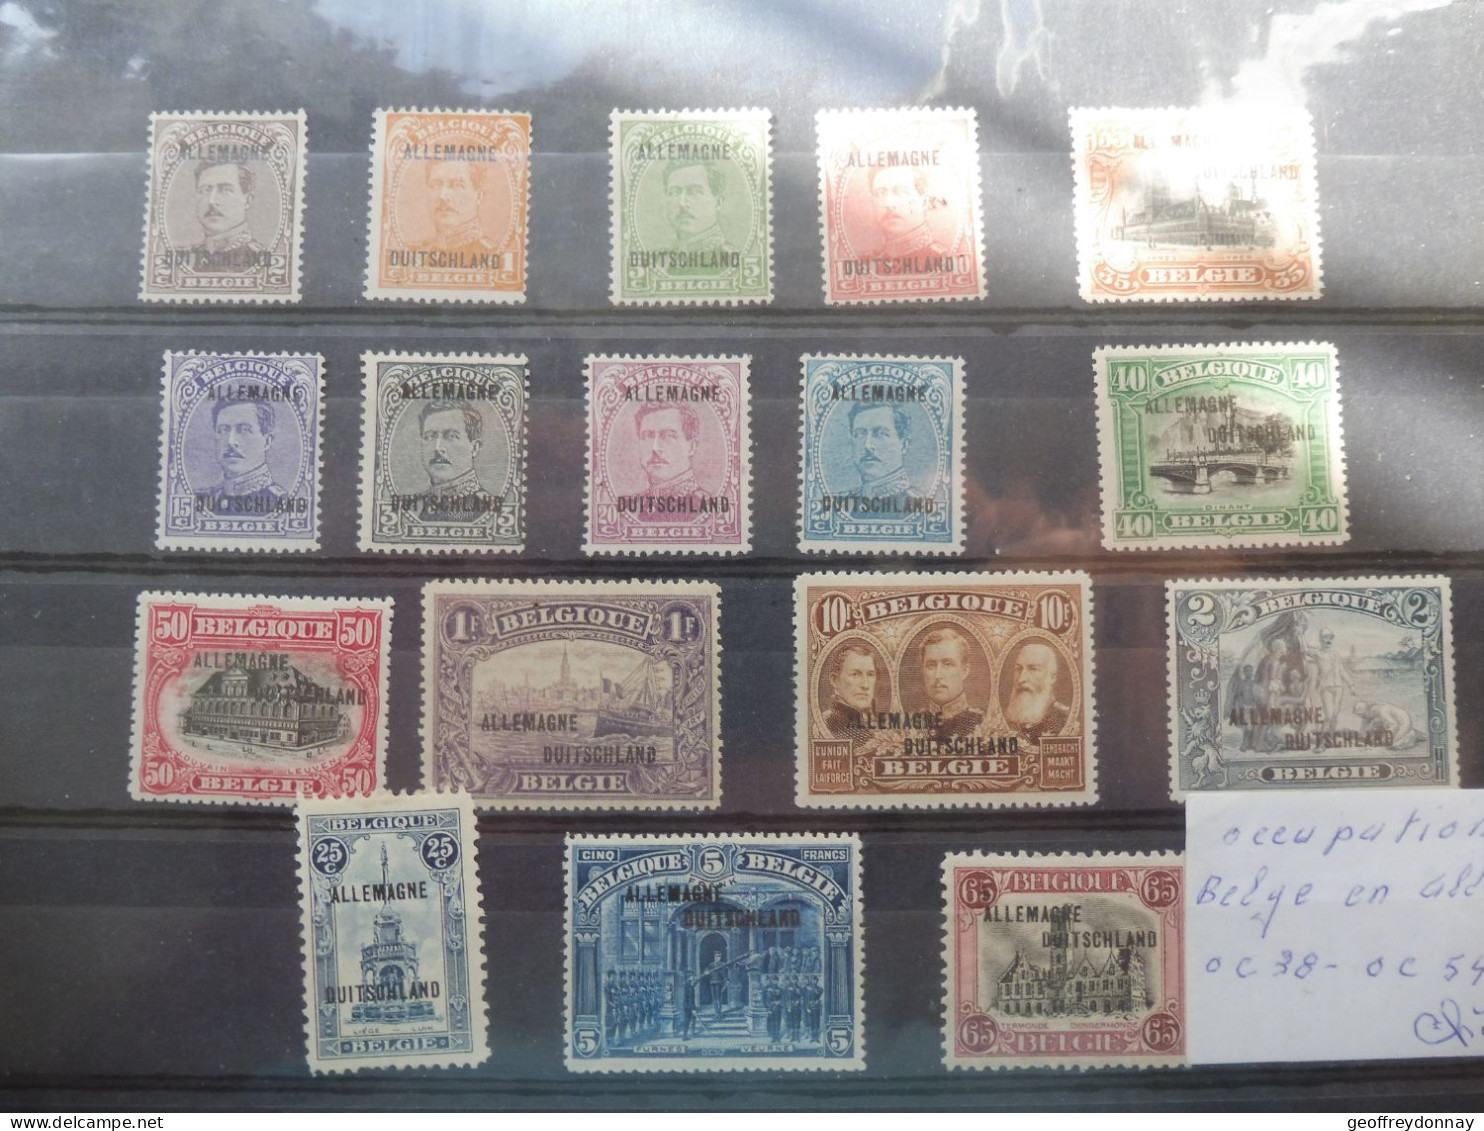 Belgique Belgie Occupation Oc 38/54 Mnh Neuf ** Perfect Parfait Peu Courant - OC38/54 Belgian Occupation In Germany